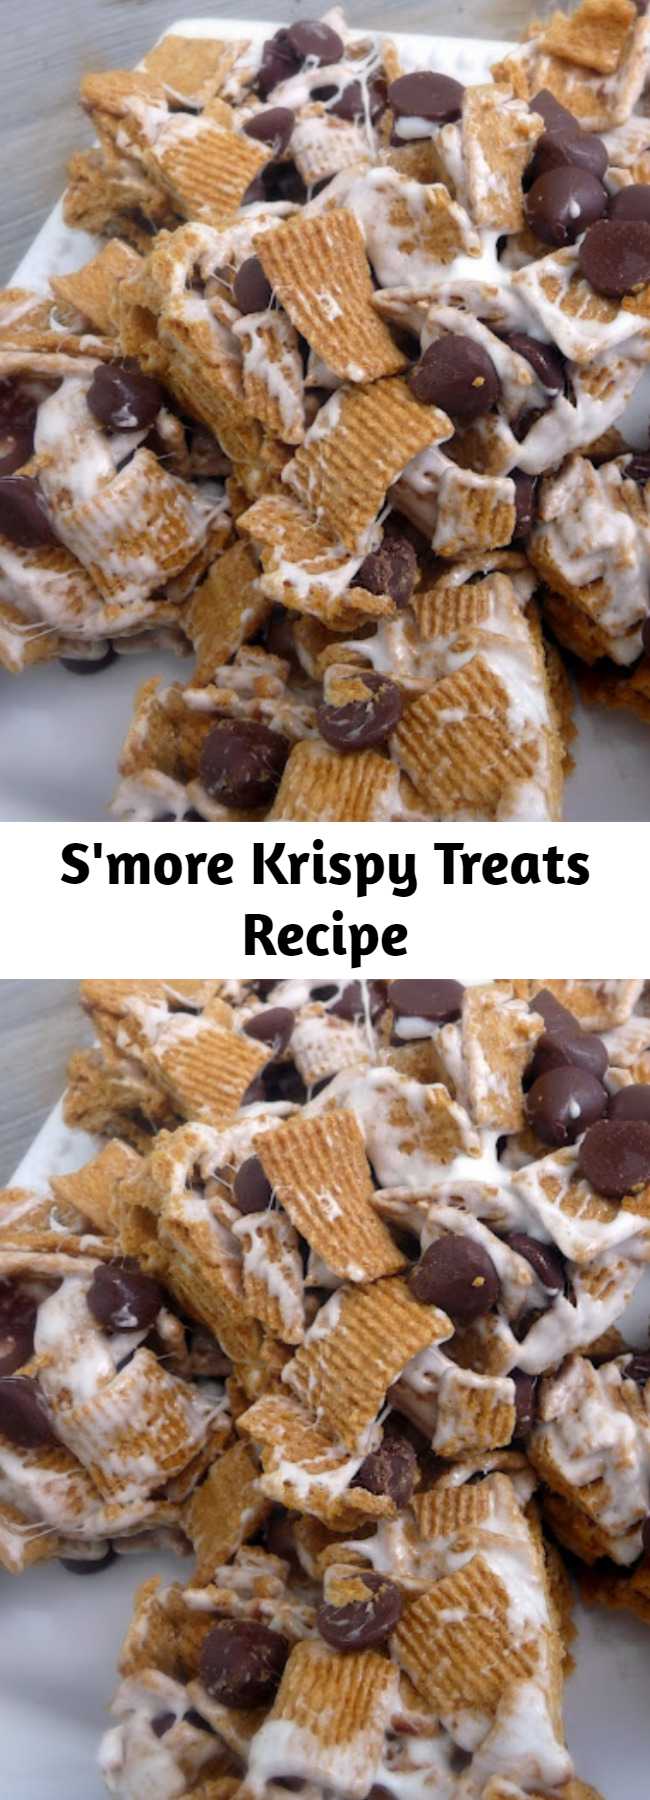 S'more Krispy Treats Recipe - These S'mores bars are incredible! So easy to make and completely delicious!